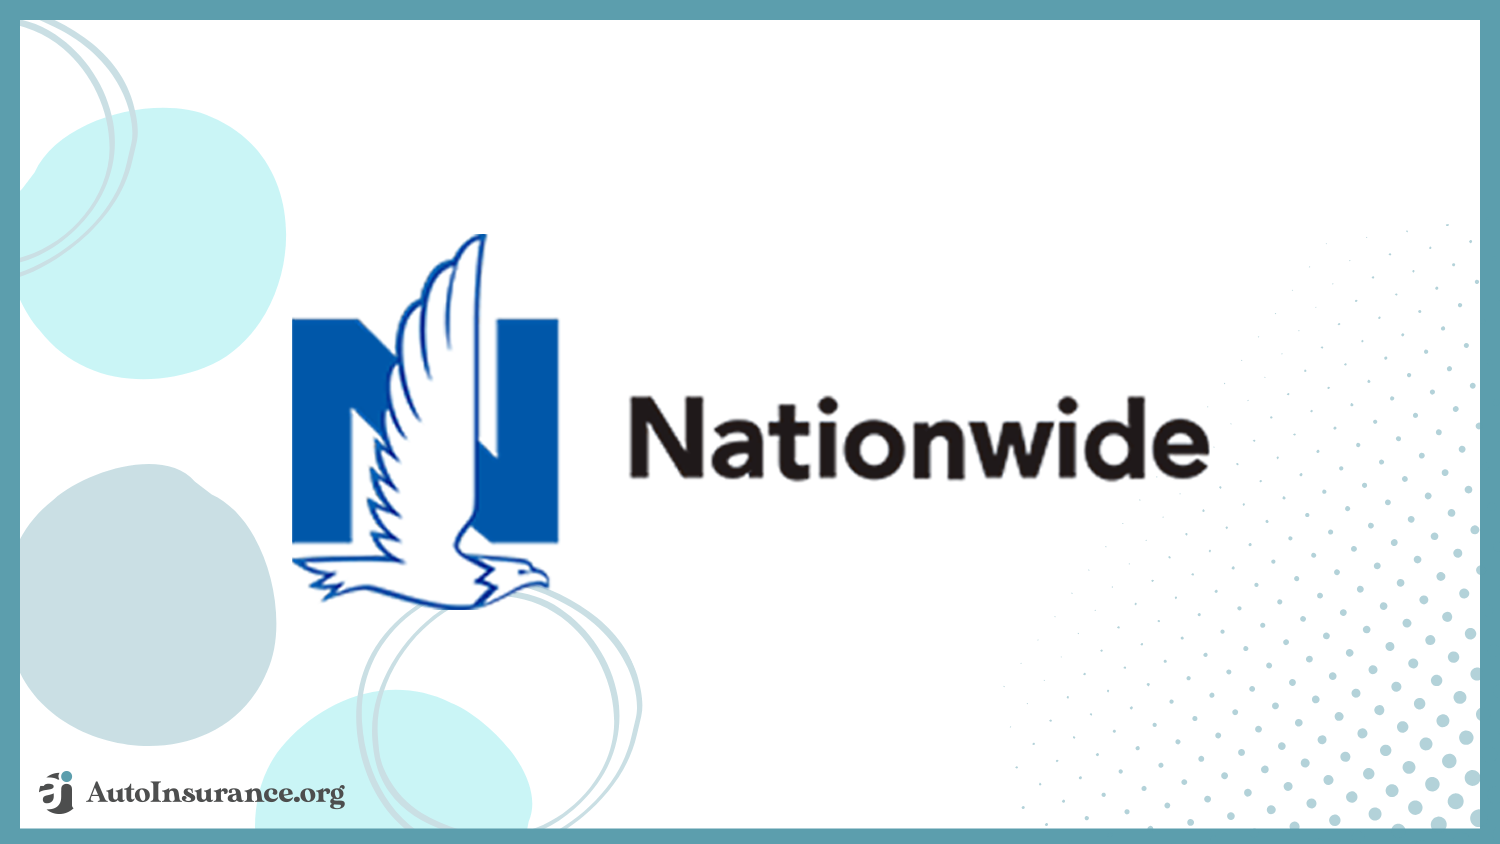 Nationwide: Best Auto Insurance for Real Estate Agents